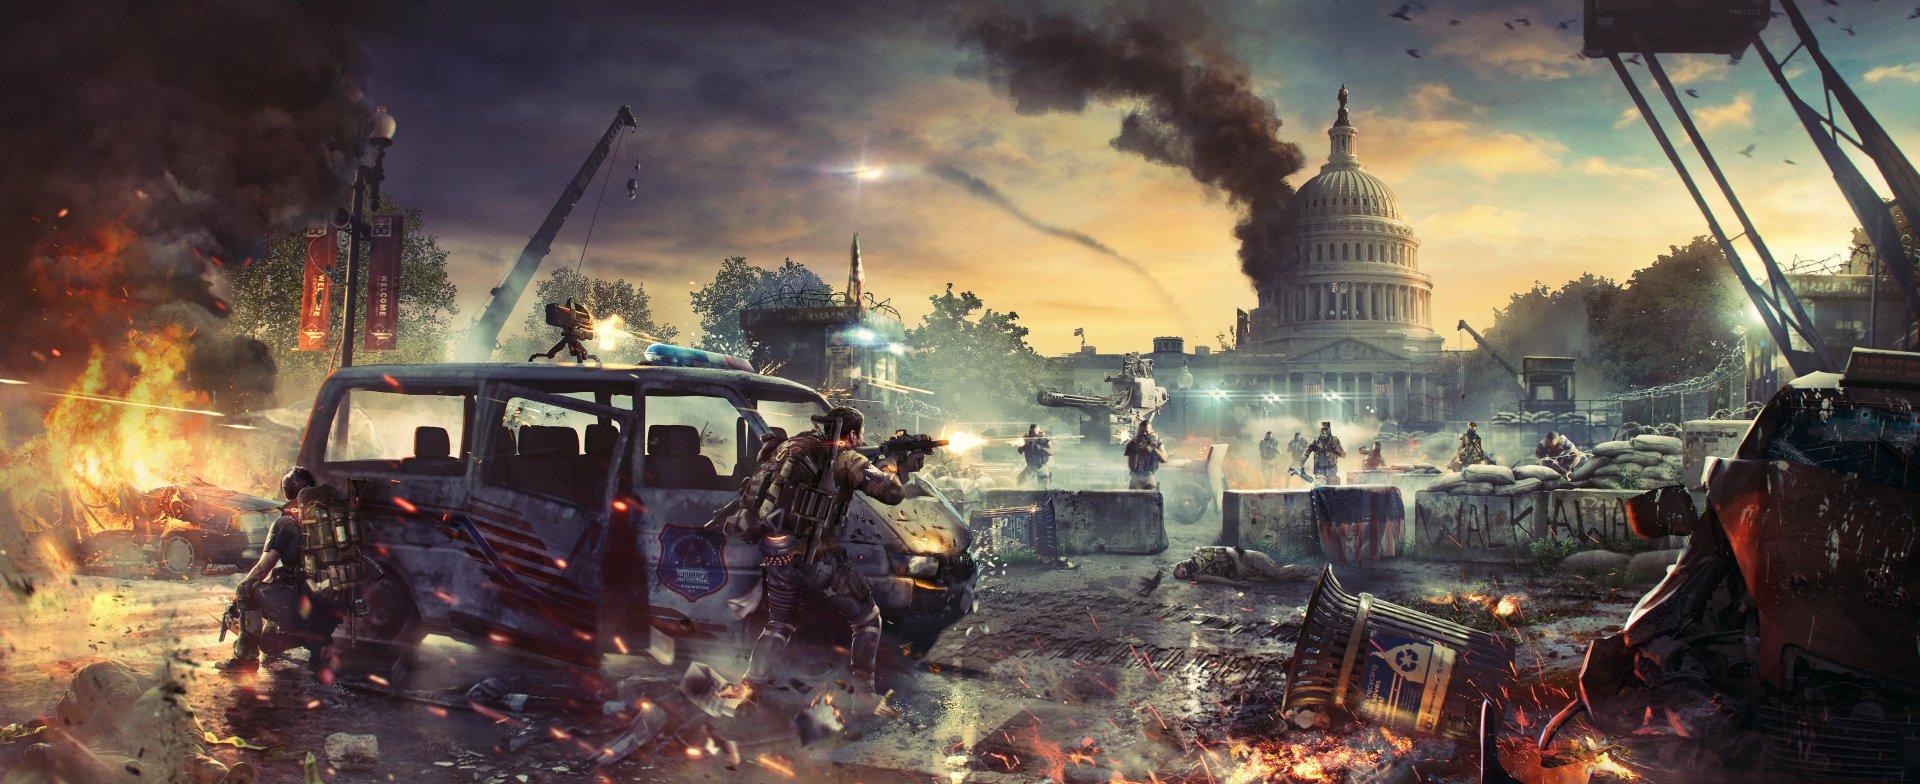 Tom Clancy's The Division 2 HD Wallpaper